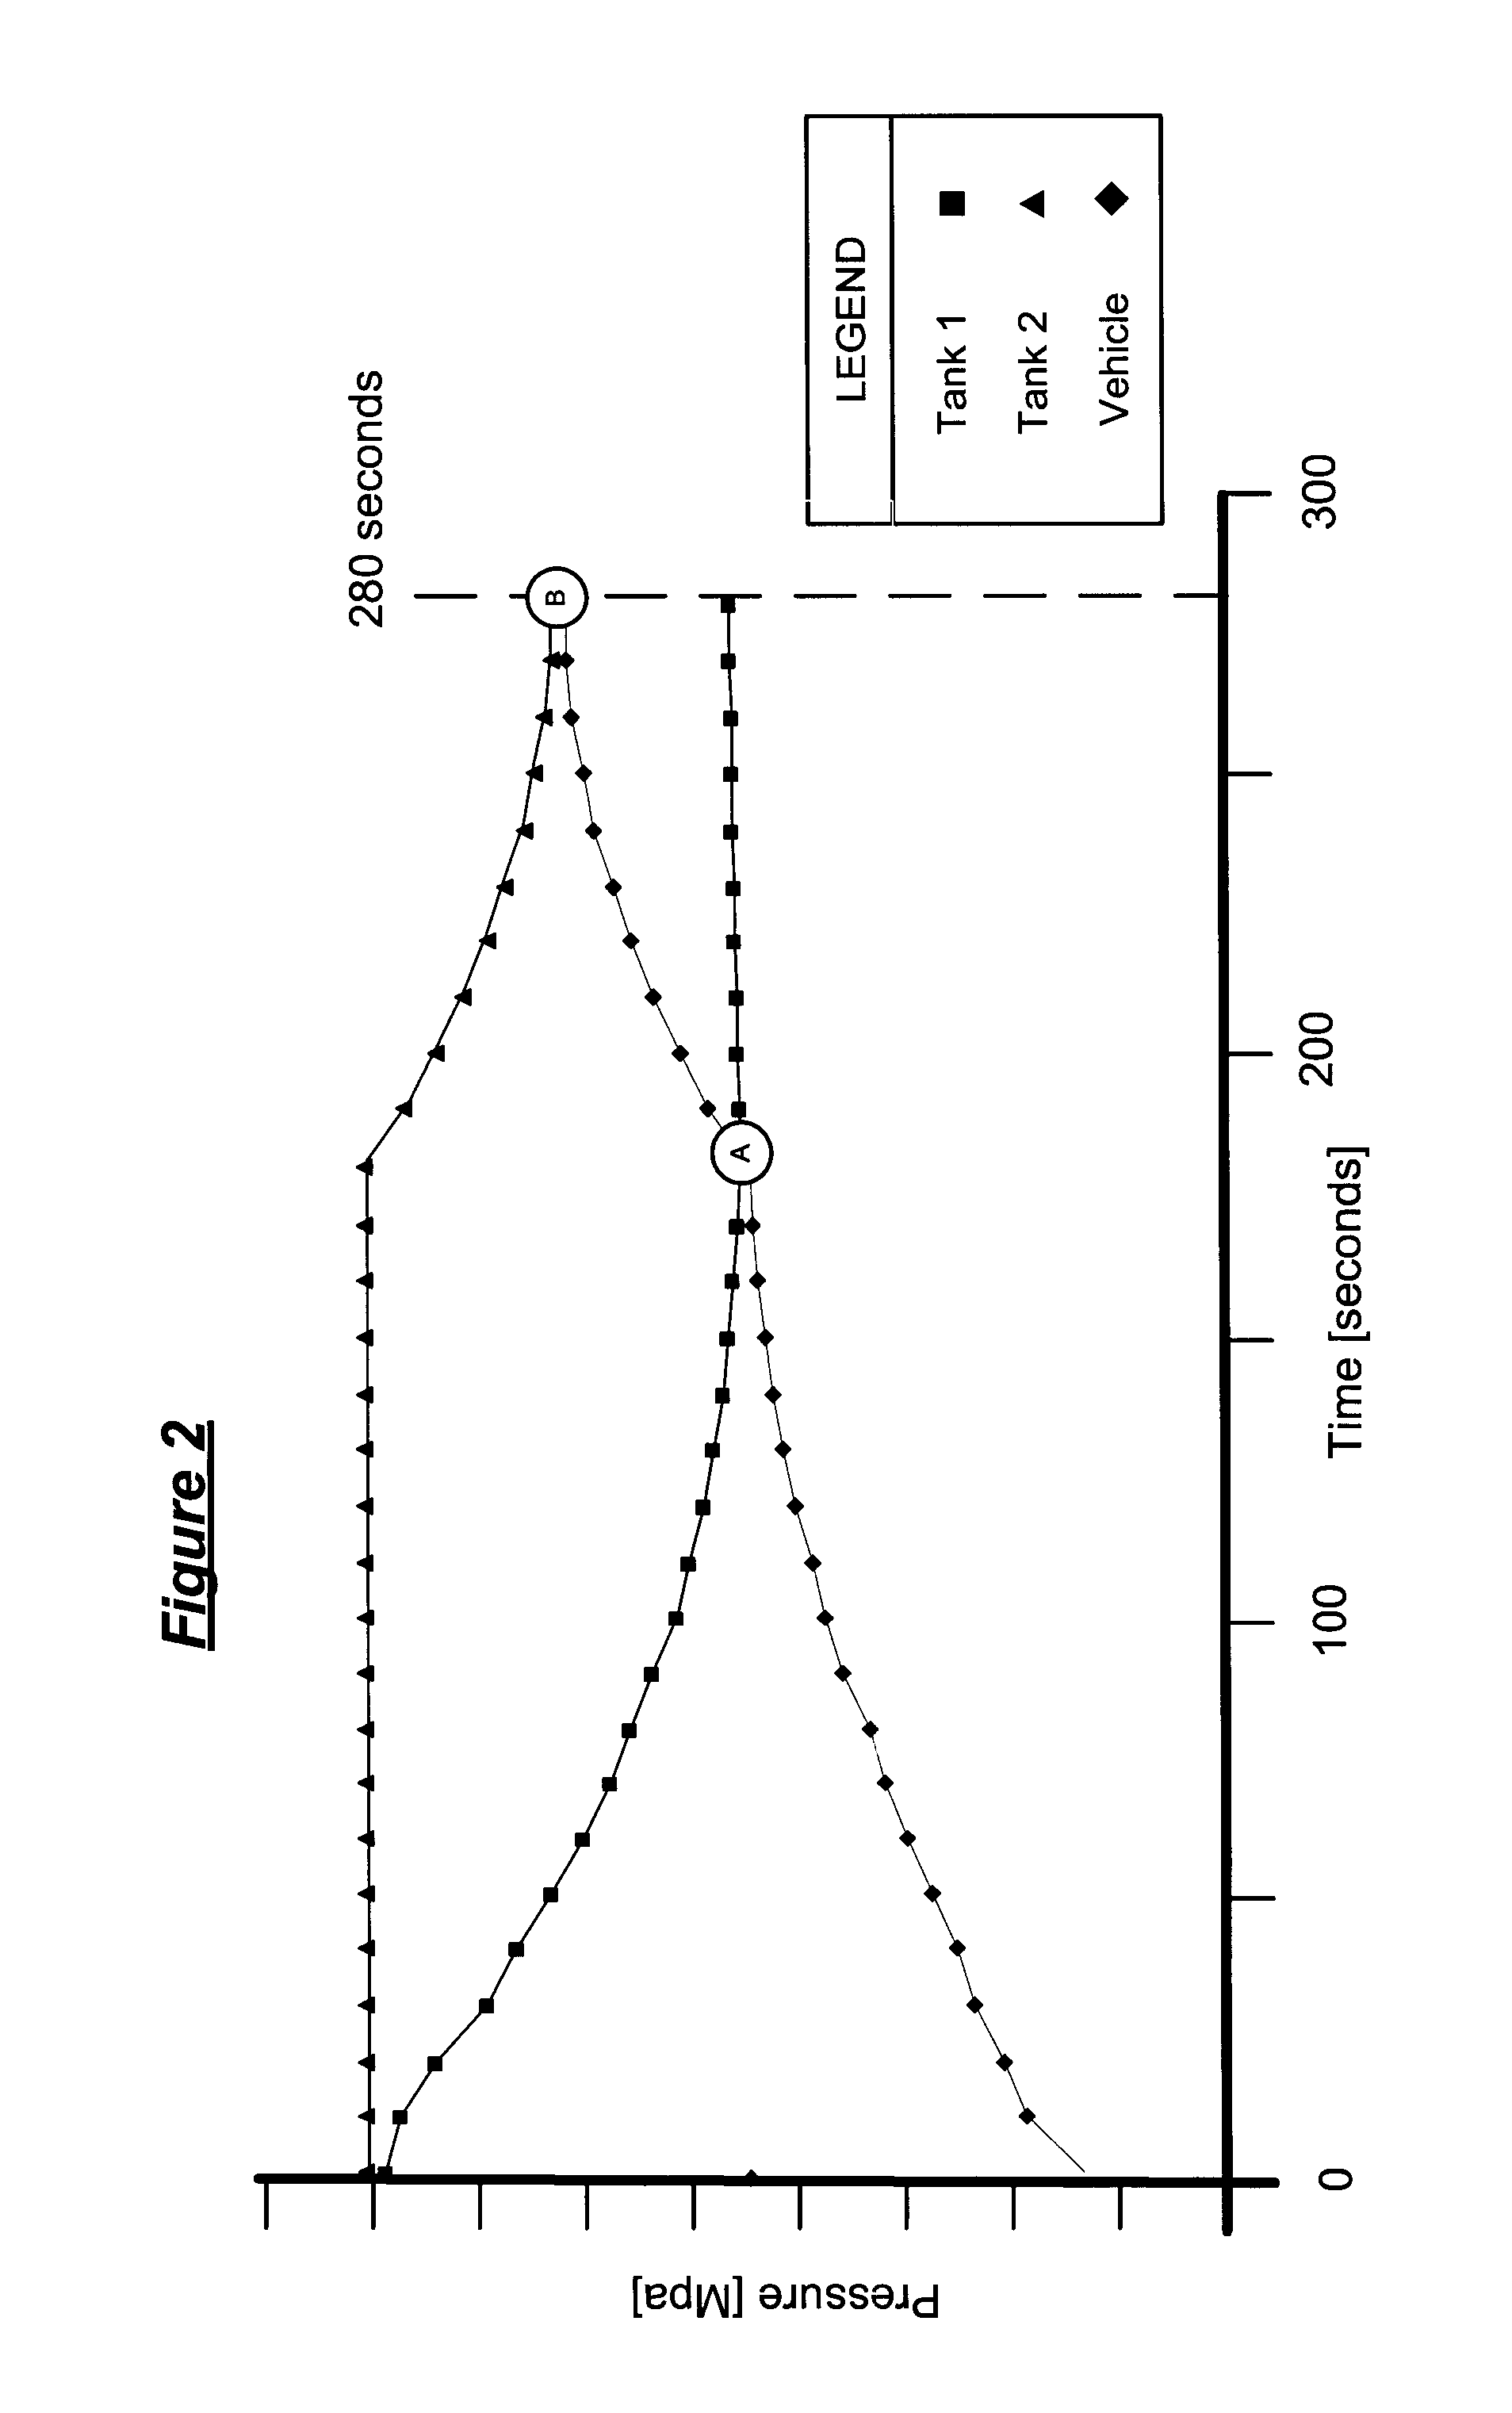 Pressure Differential System for Controlling High Pressure Refill Gas Flow Into On Board Vehicle Fuel Tanks